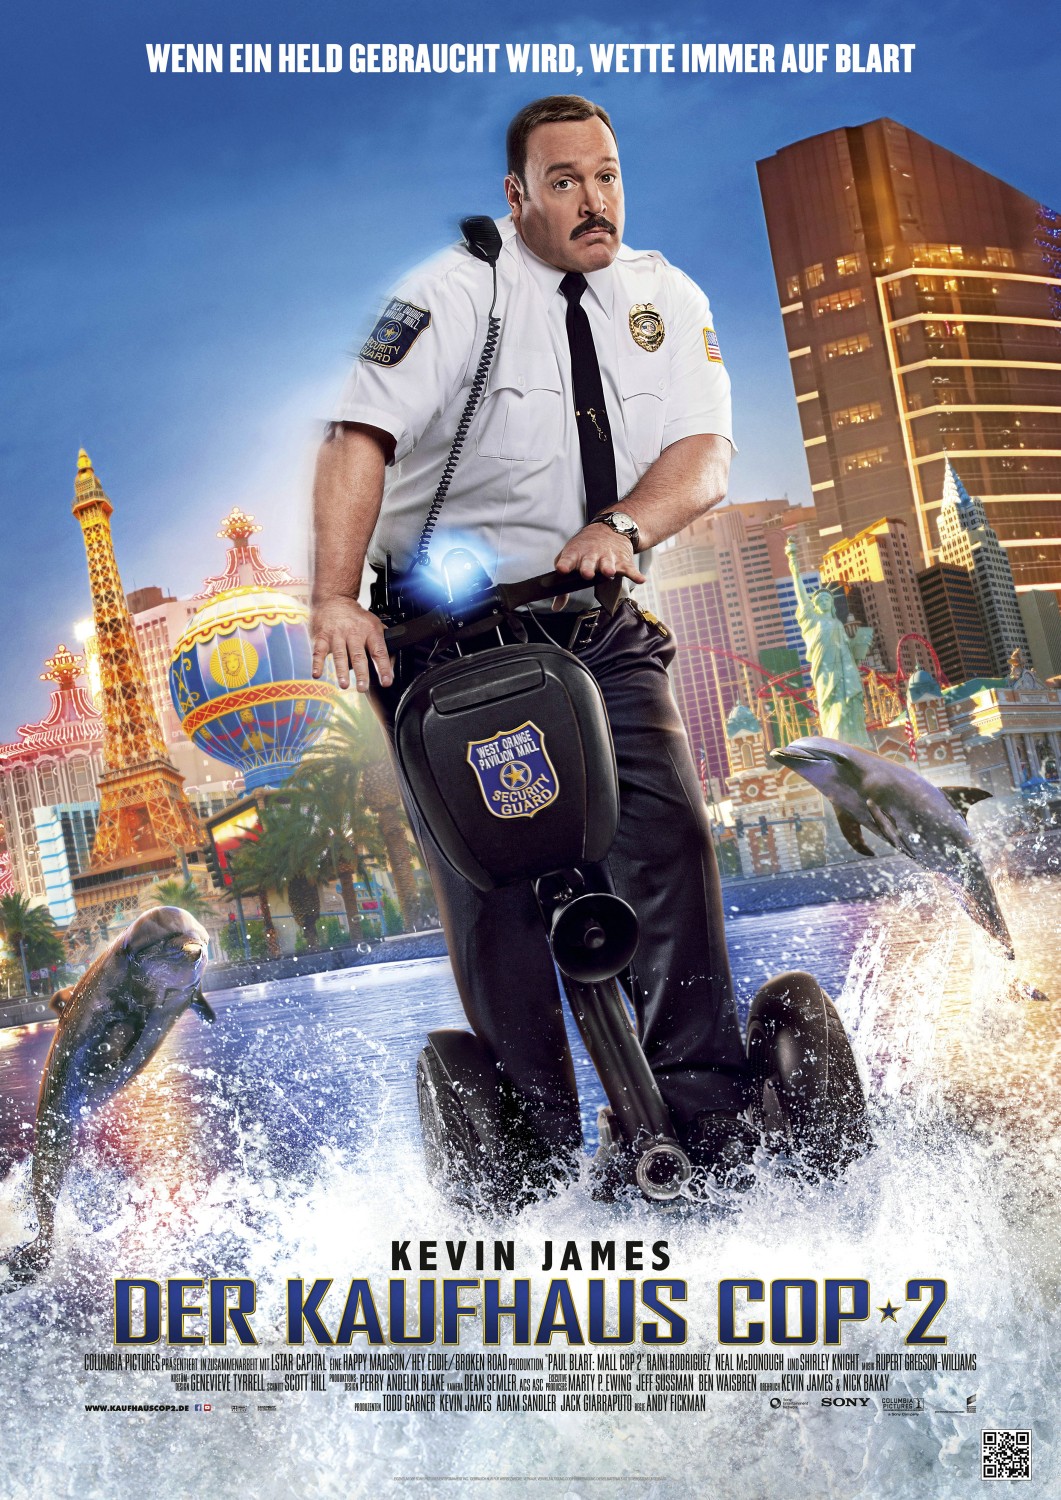 Extra Large Movie Poster Image for Paul Blart: Mall Cop 2 (#2 of 5)